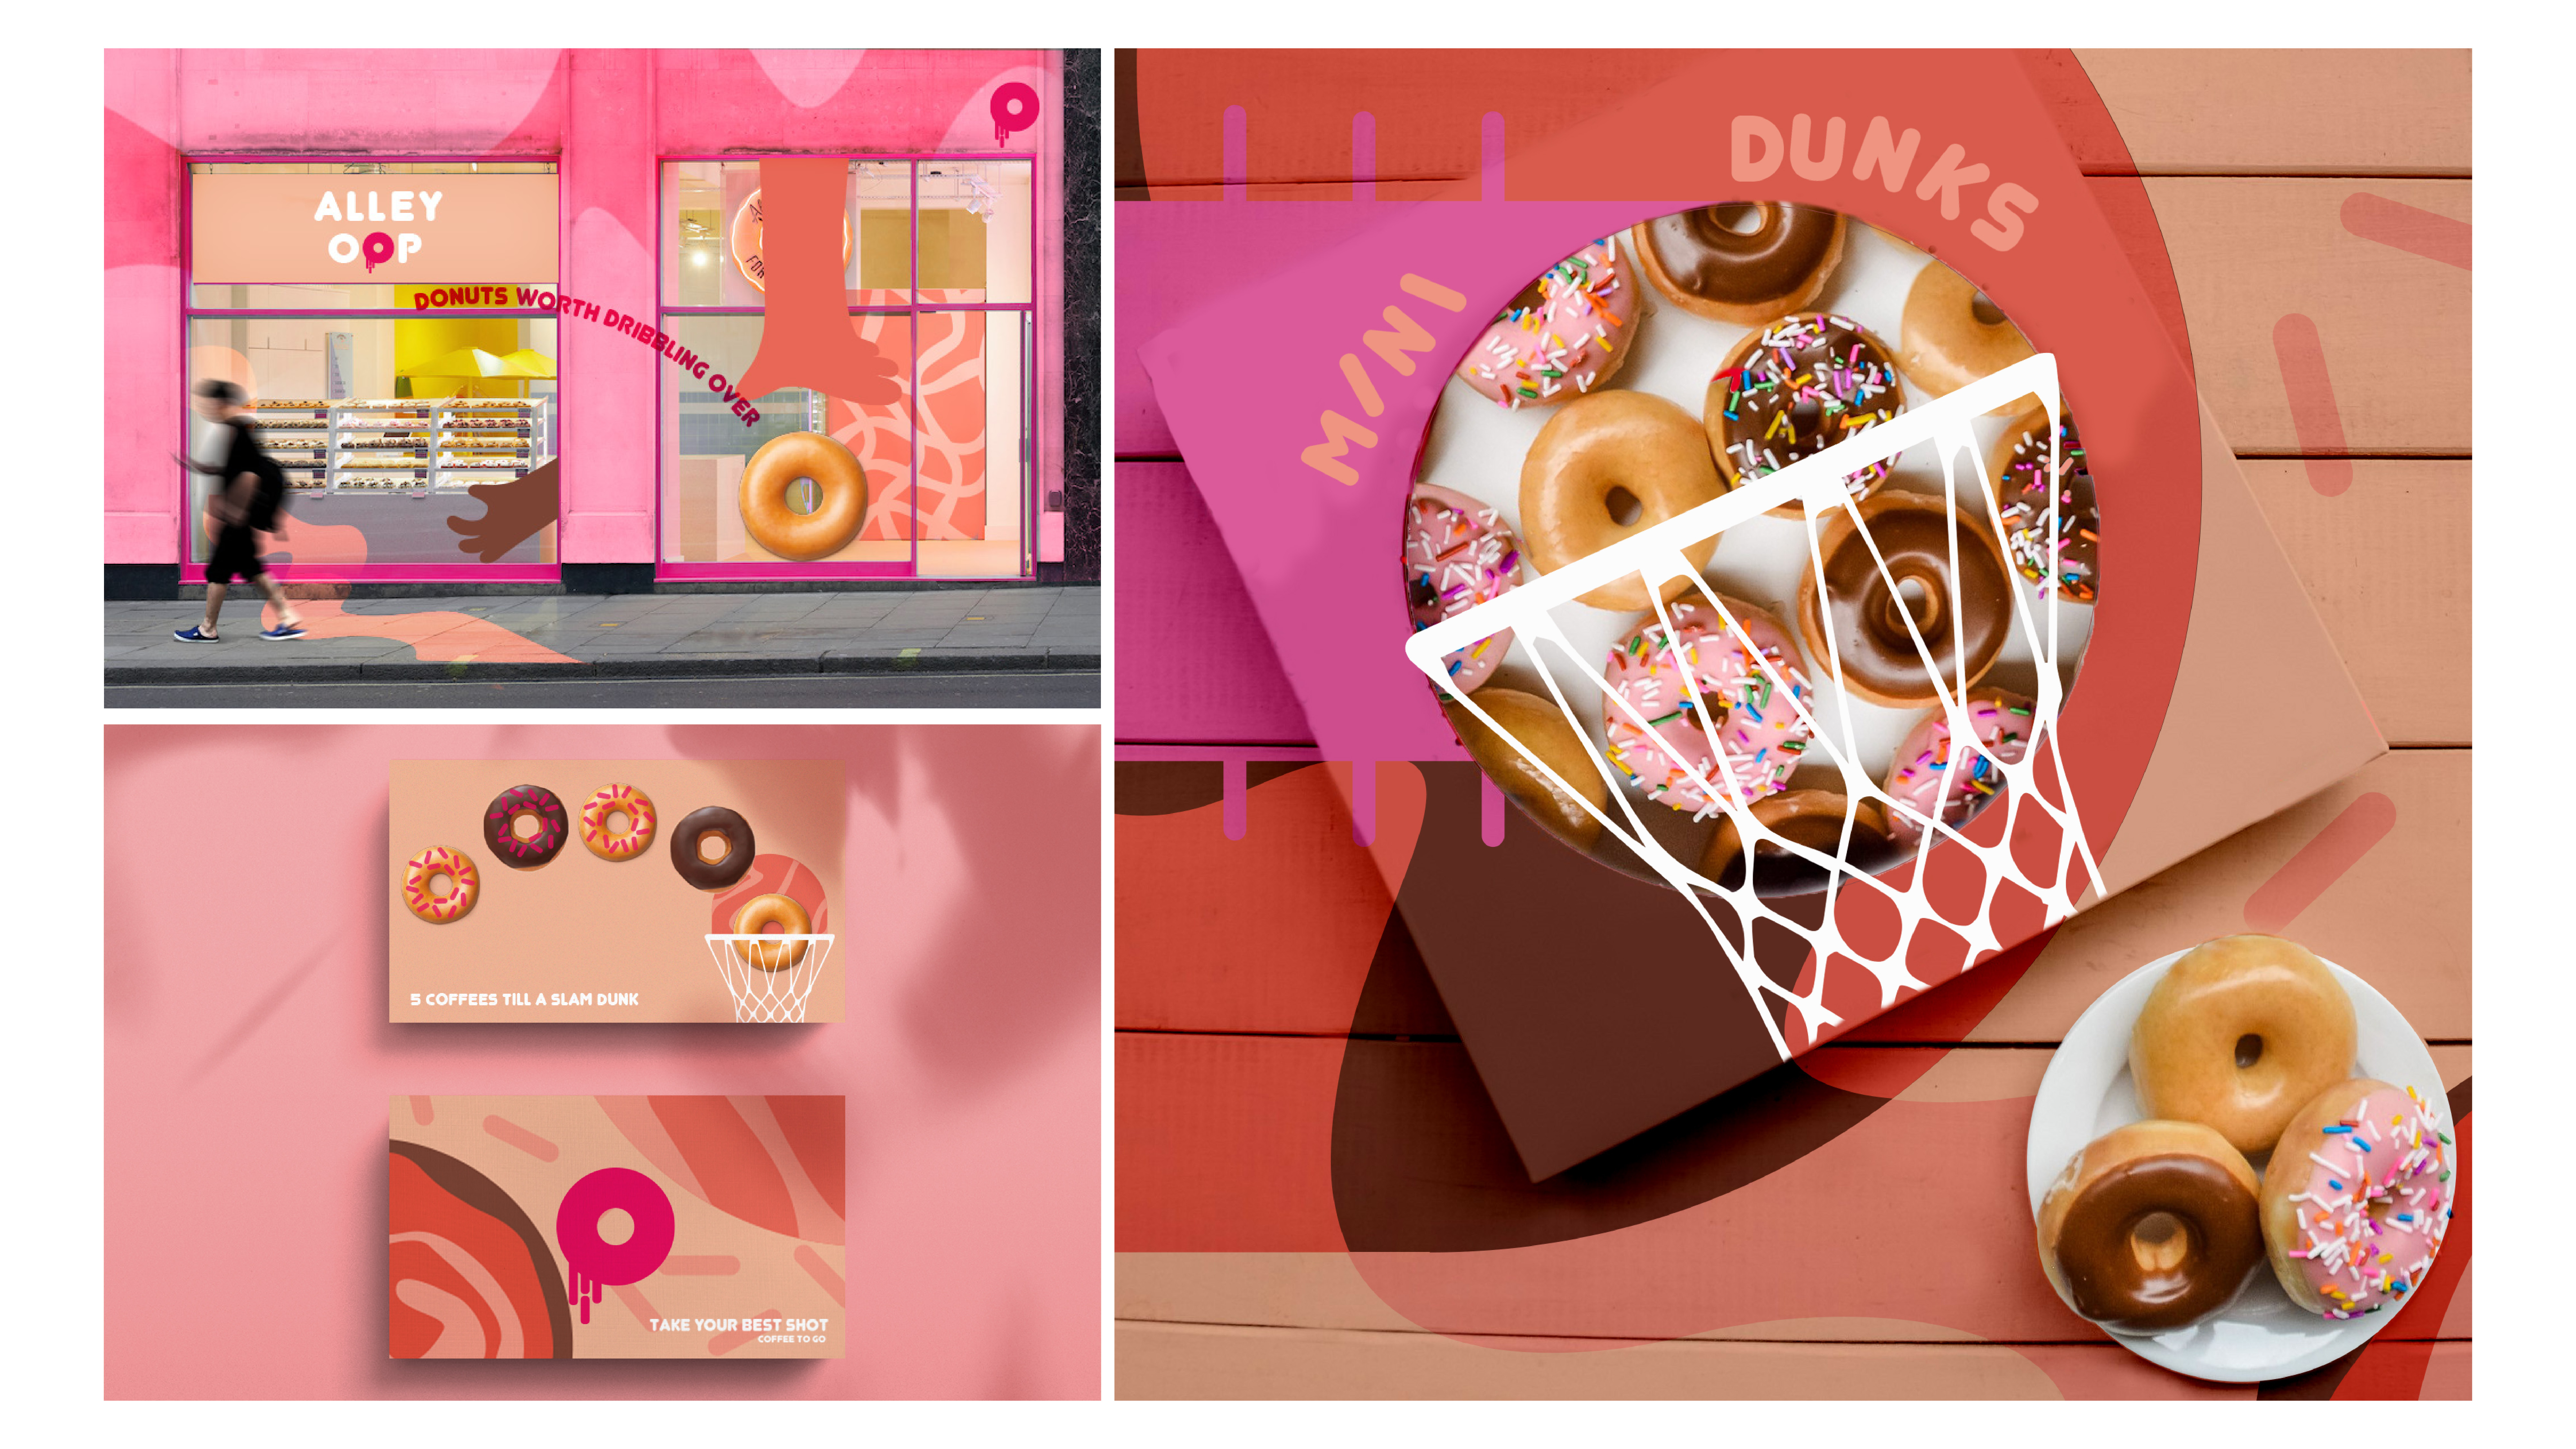 BA Graphic design work by Aemelia Rose Turton showing donut shop packaging and brand extensions